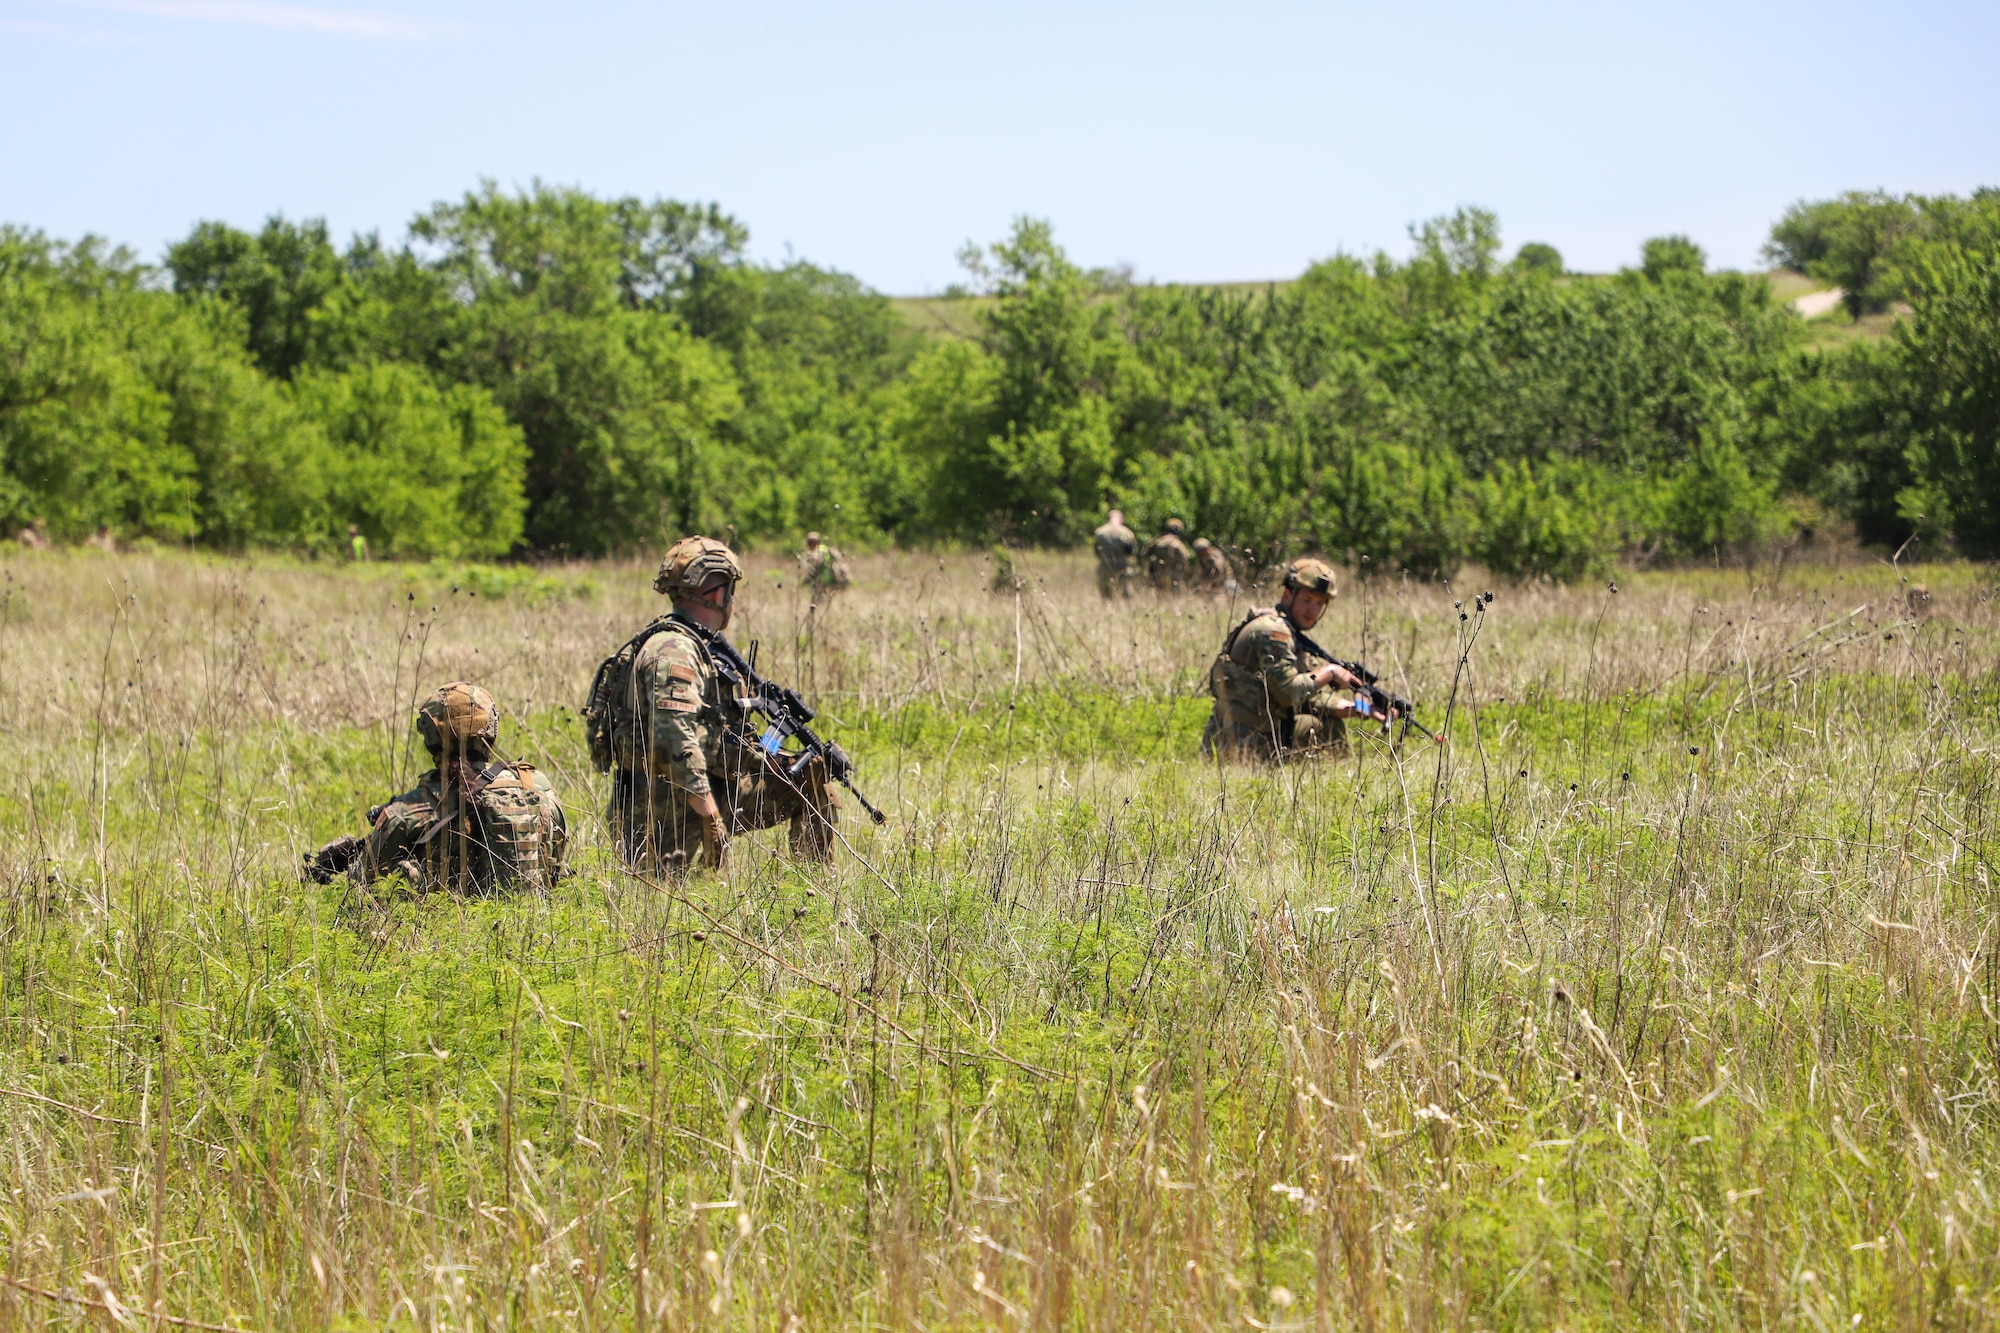 Airmen assigned to the 184th Security Forces Squadron tested their combat skills during Exercise Tinman at Smoky Hill Weapons Range in early June.